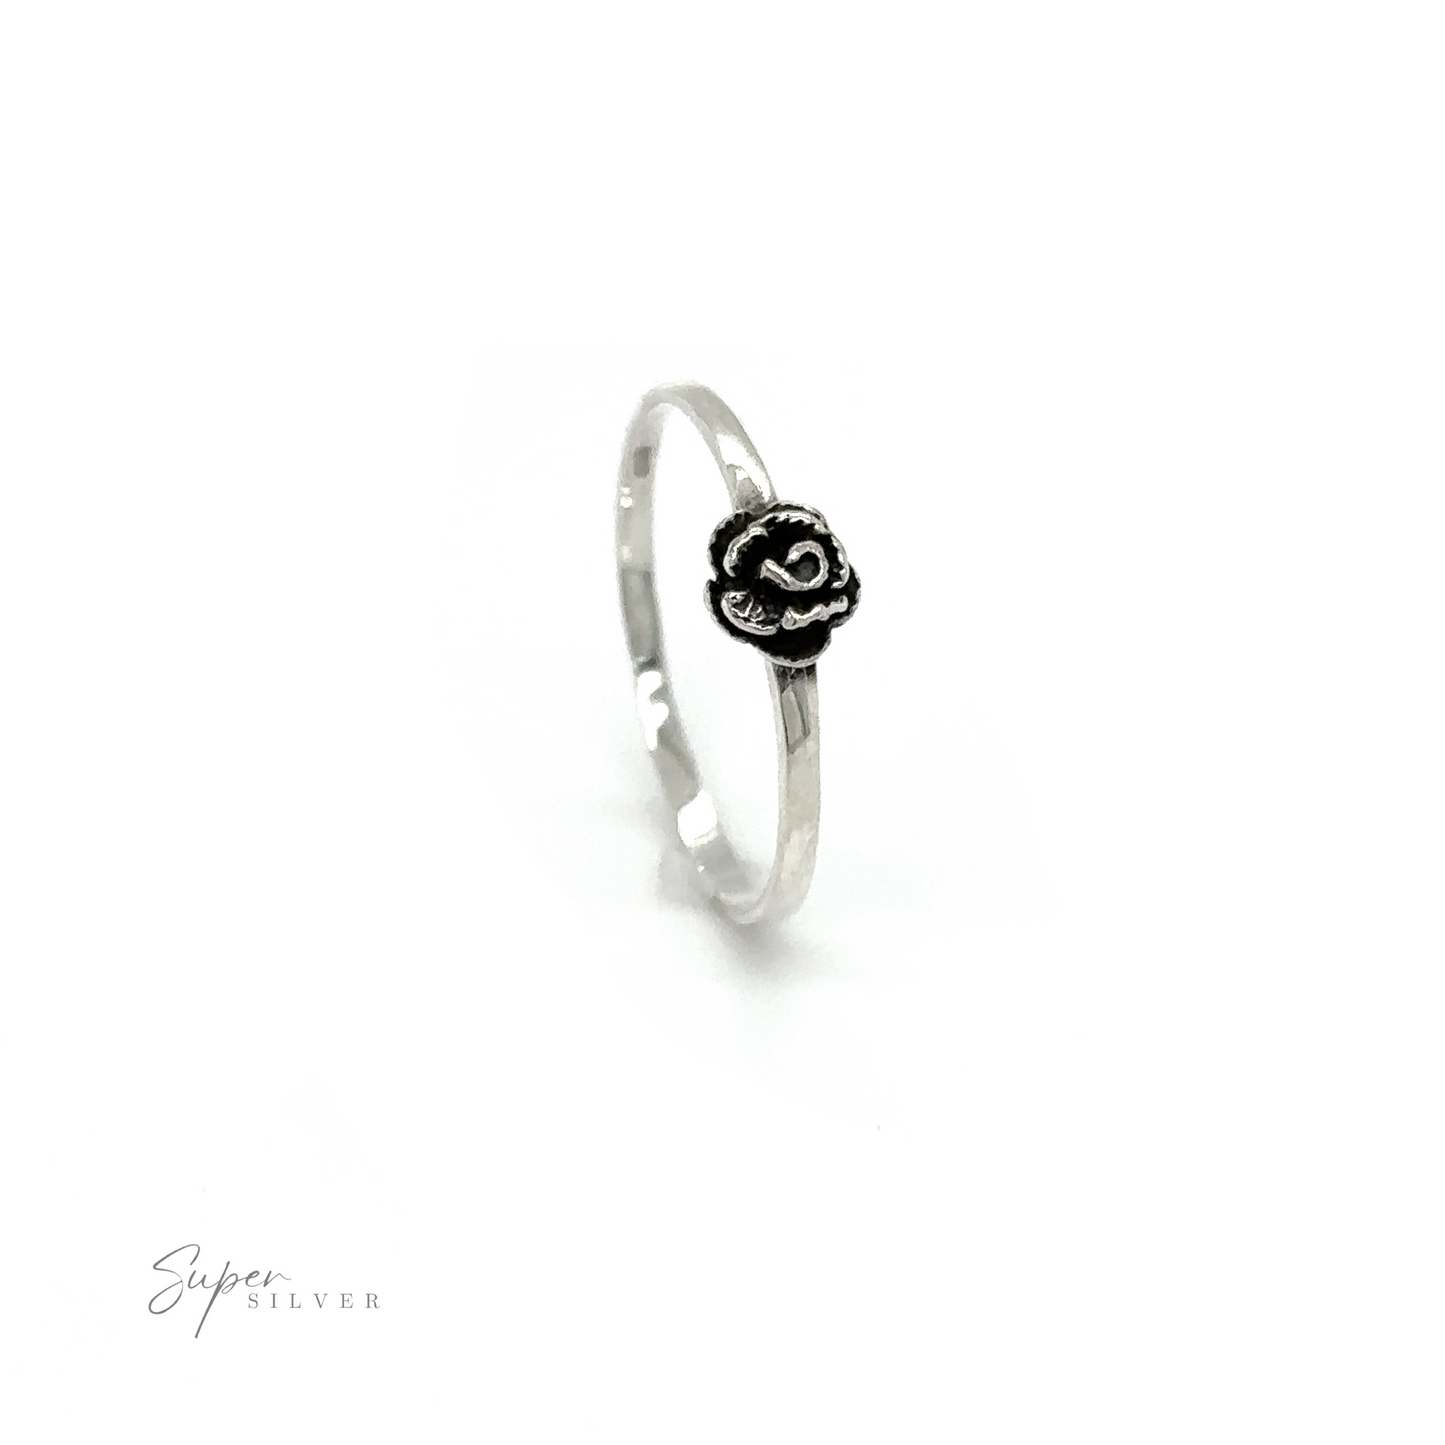 A Dainty Rose Ring adorned with a black rose, inspired by nature and the vibes of Santa Cruz.